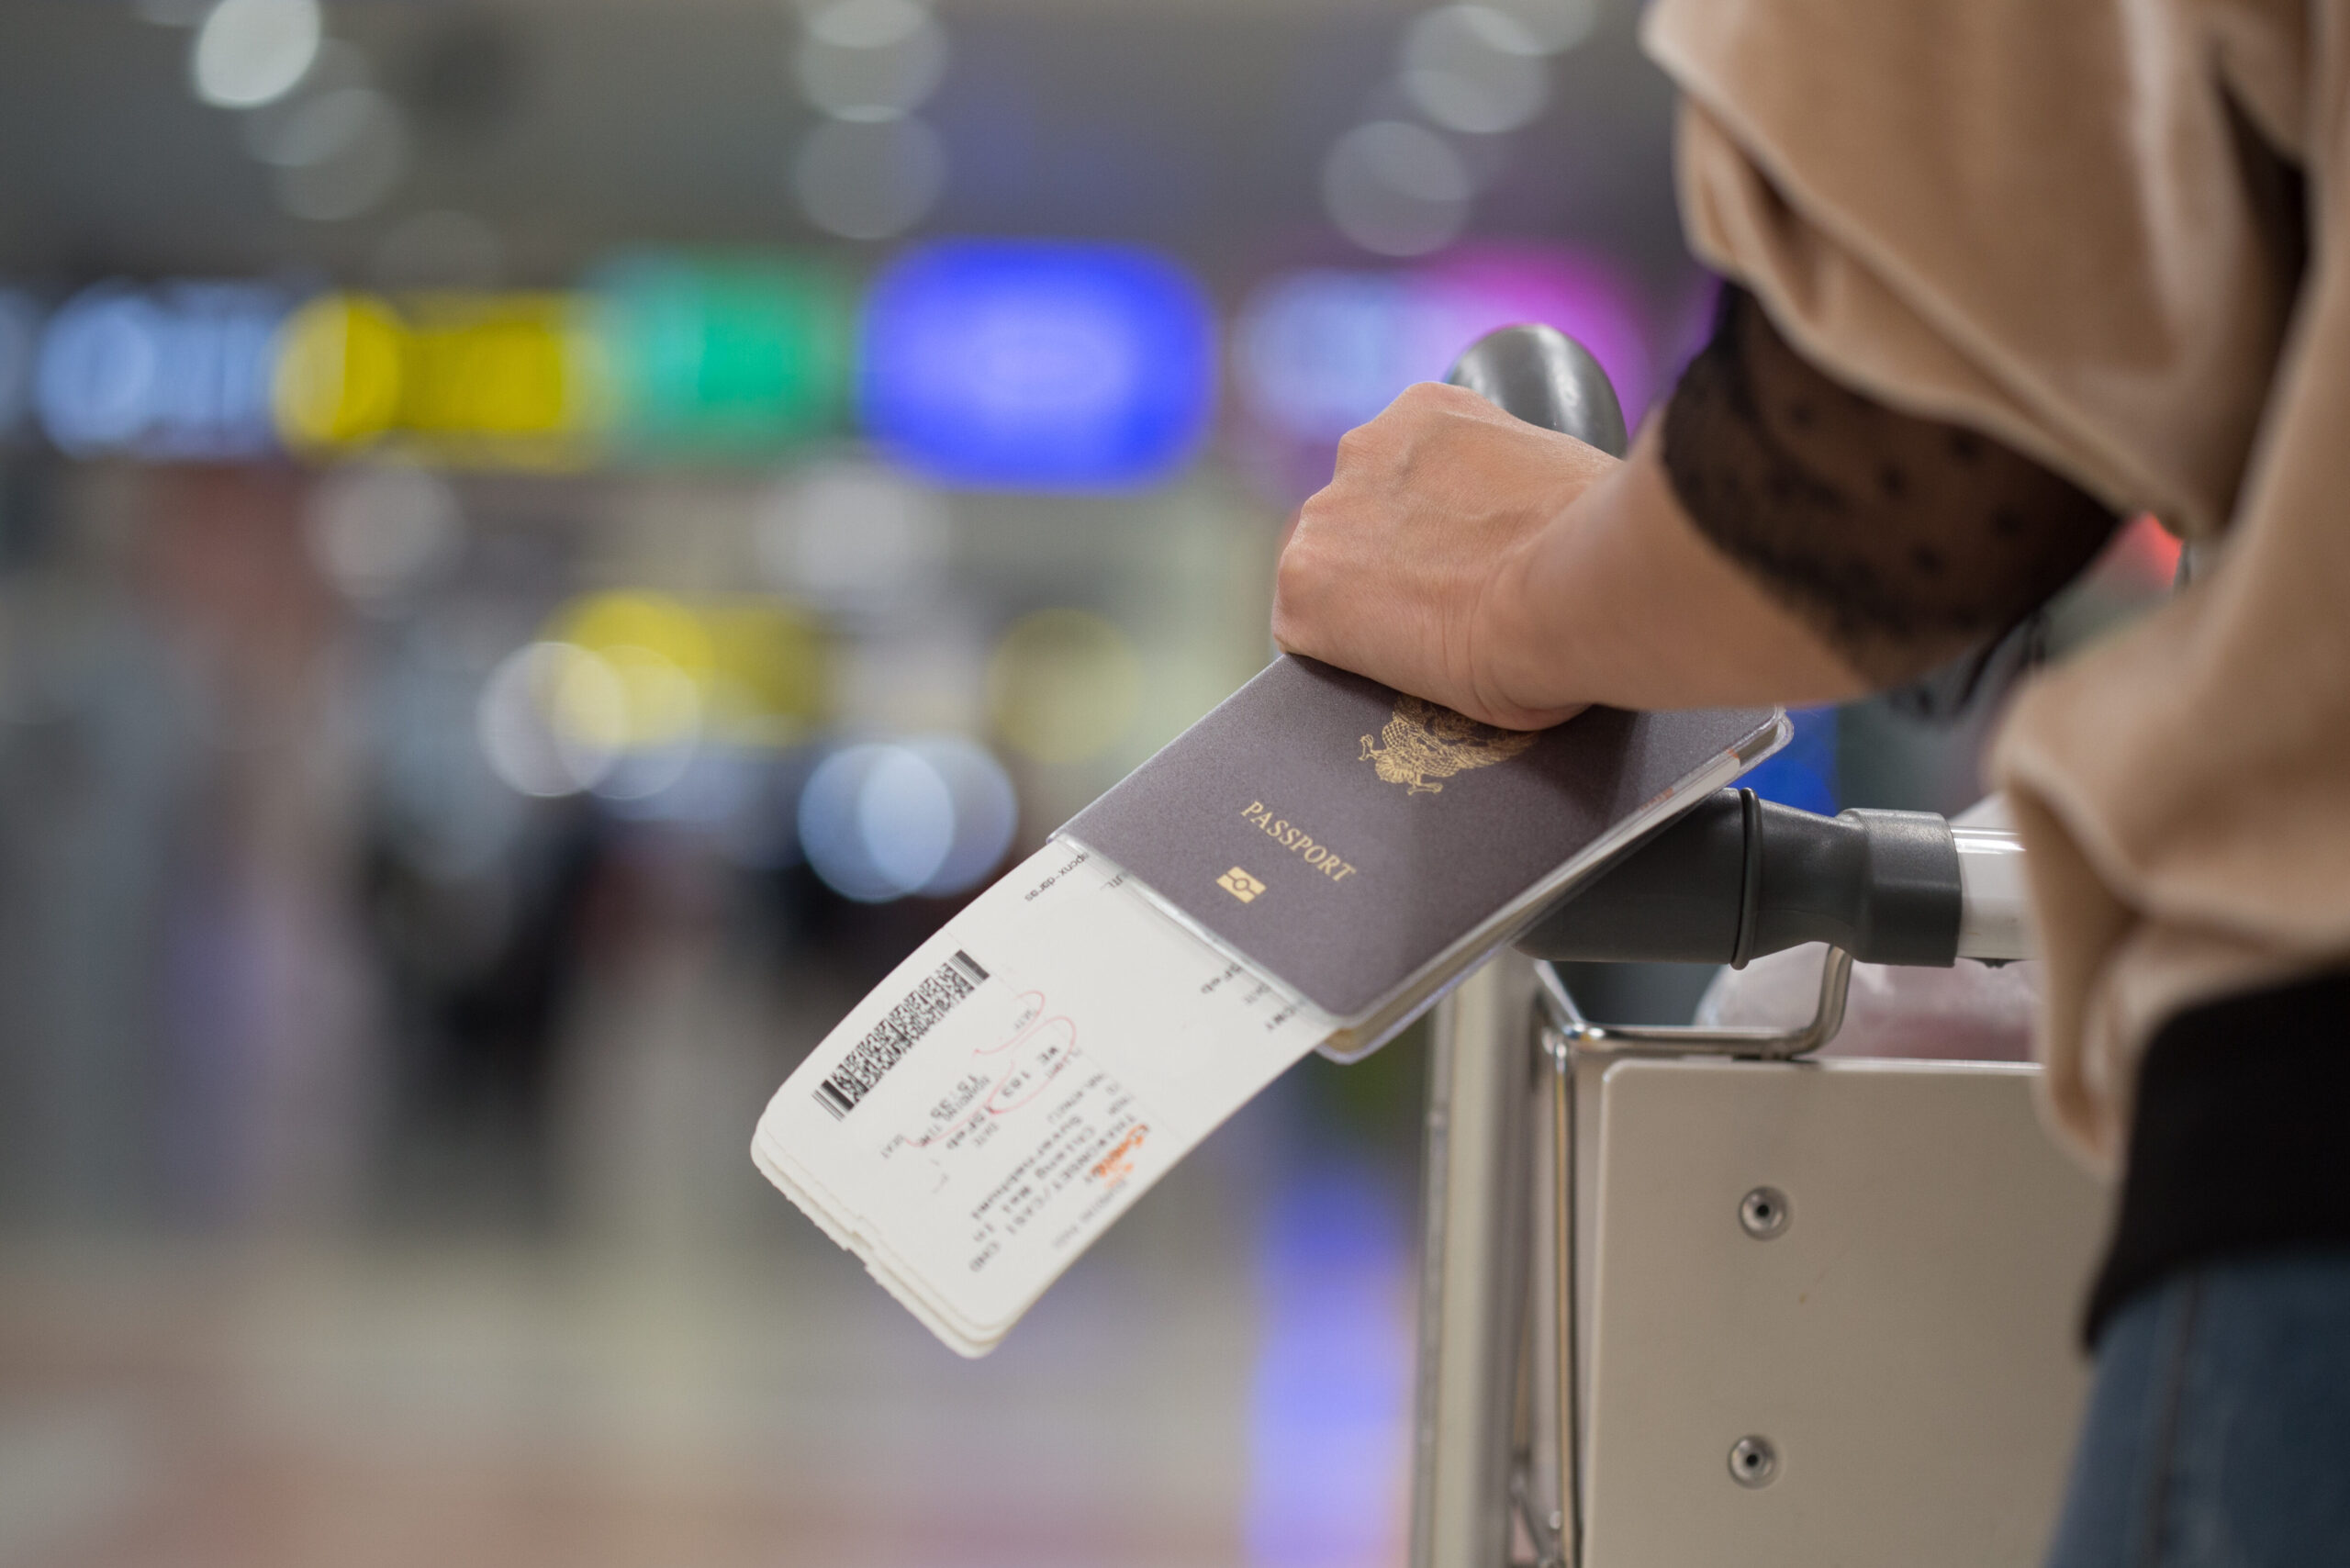 Close up of person holding a passport and boarding passes while pushing luggage through an airport